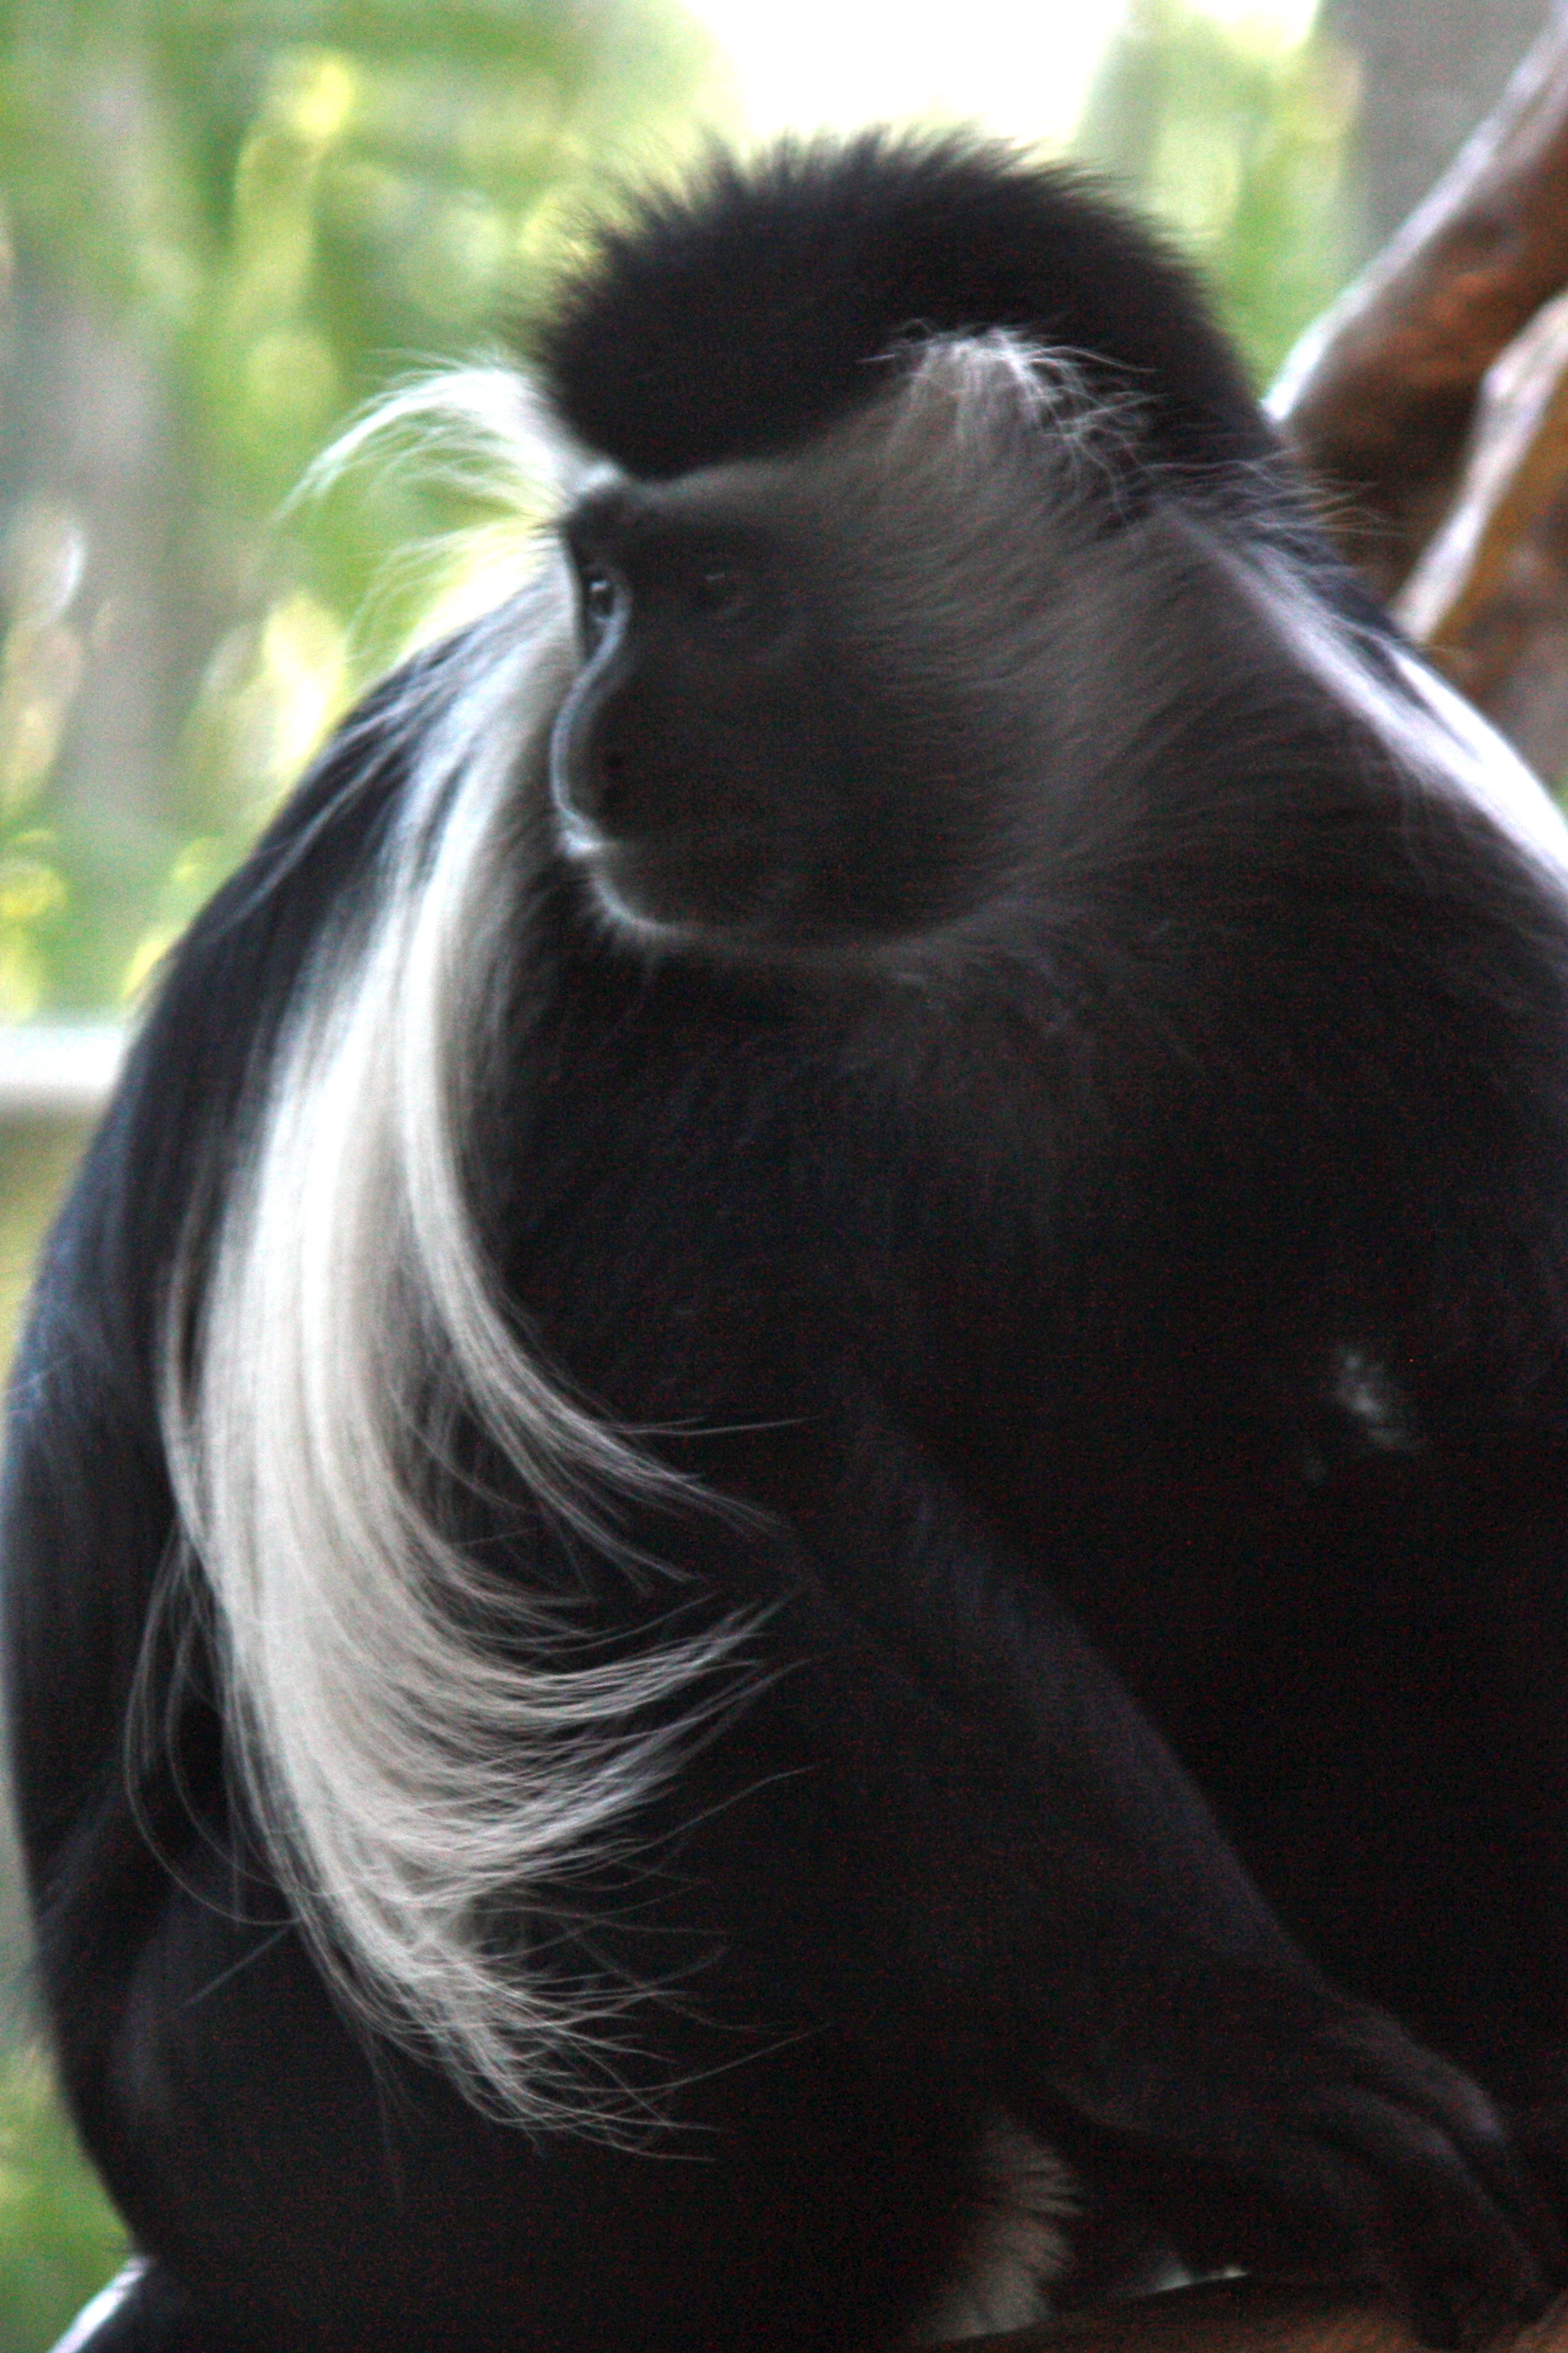 Monkey with hair | Pics4Learning